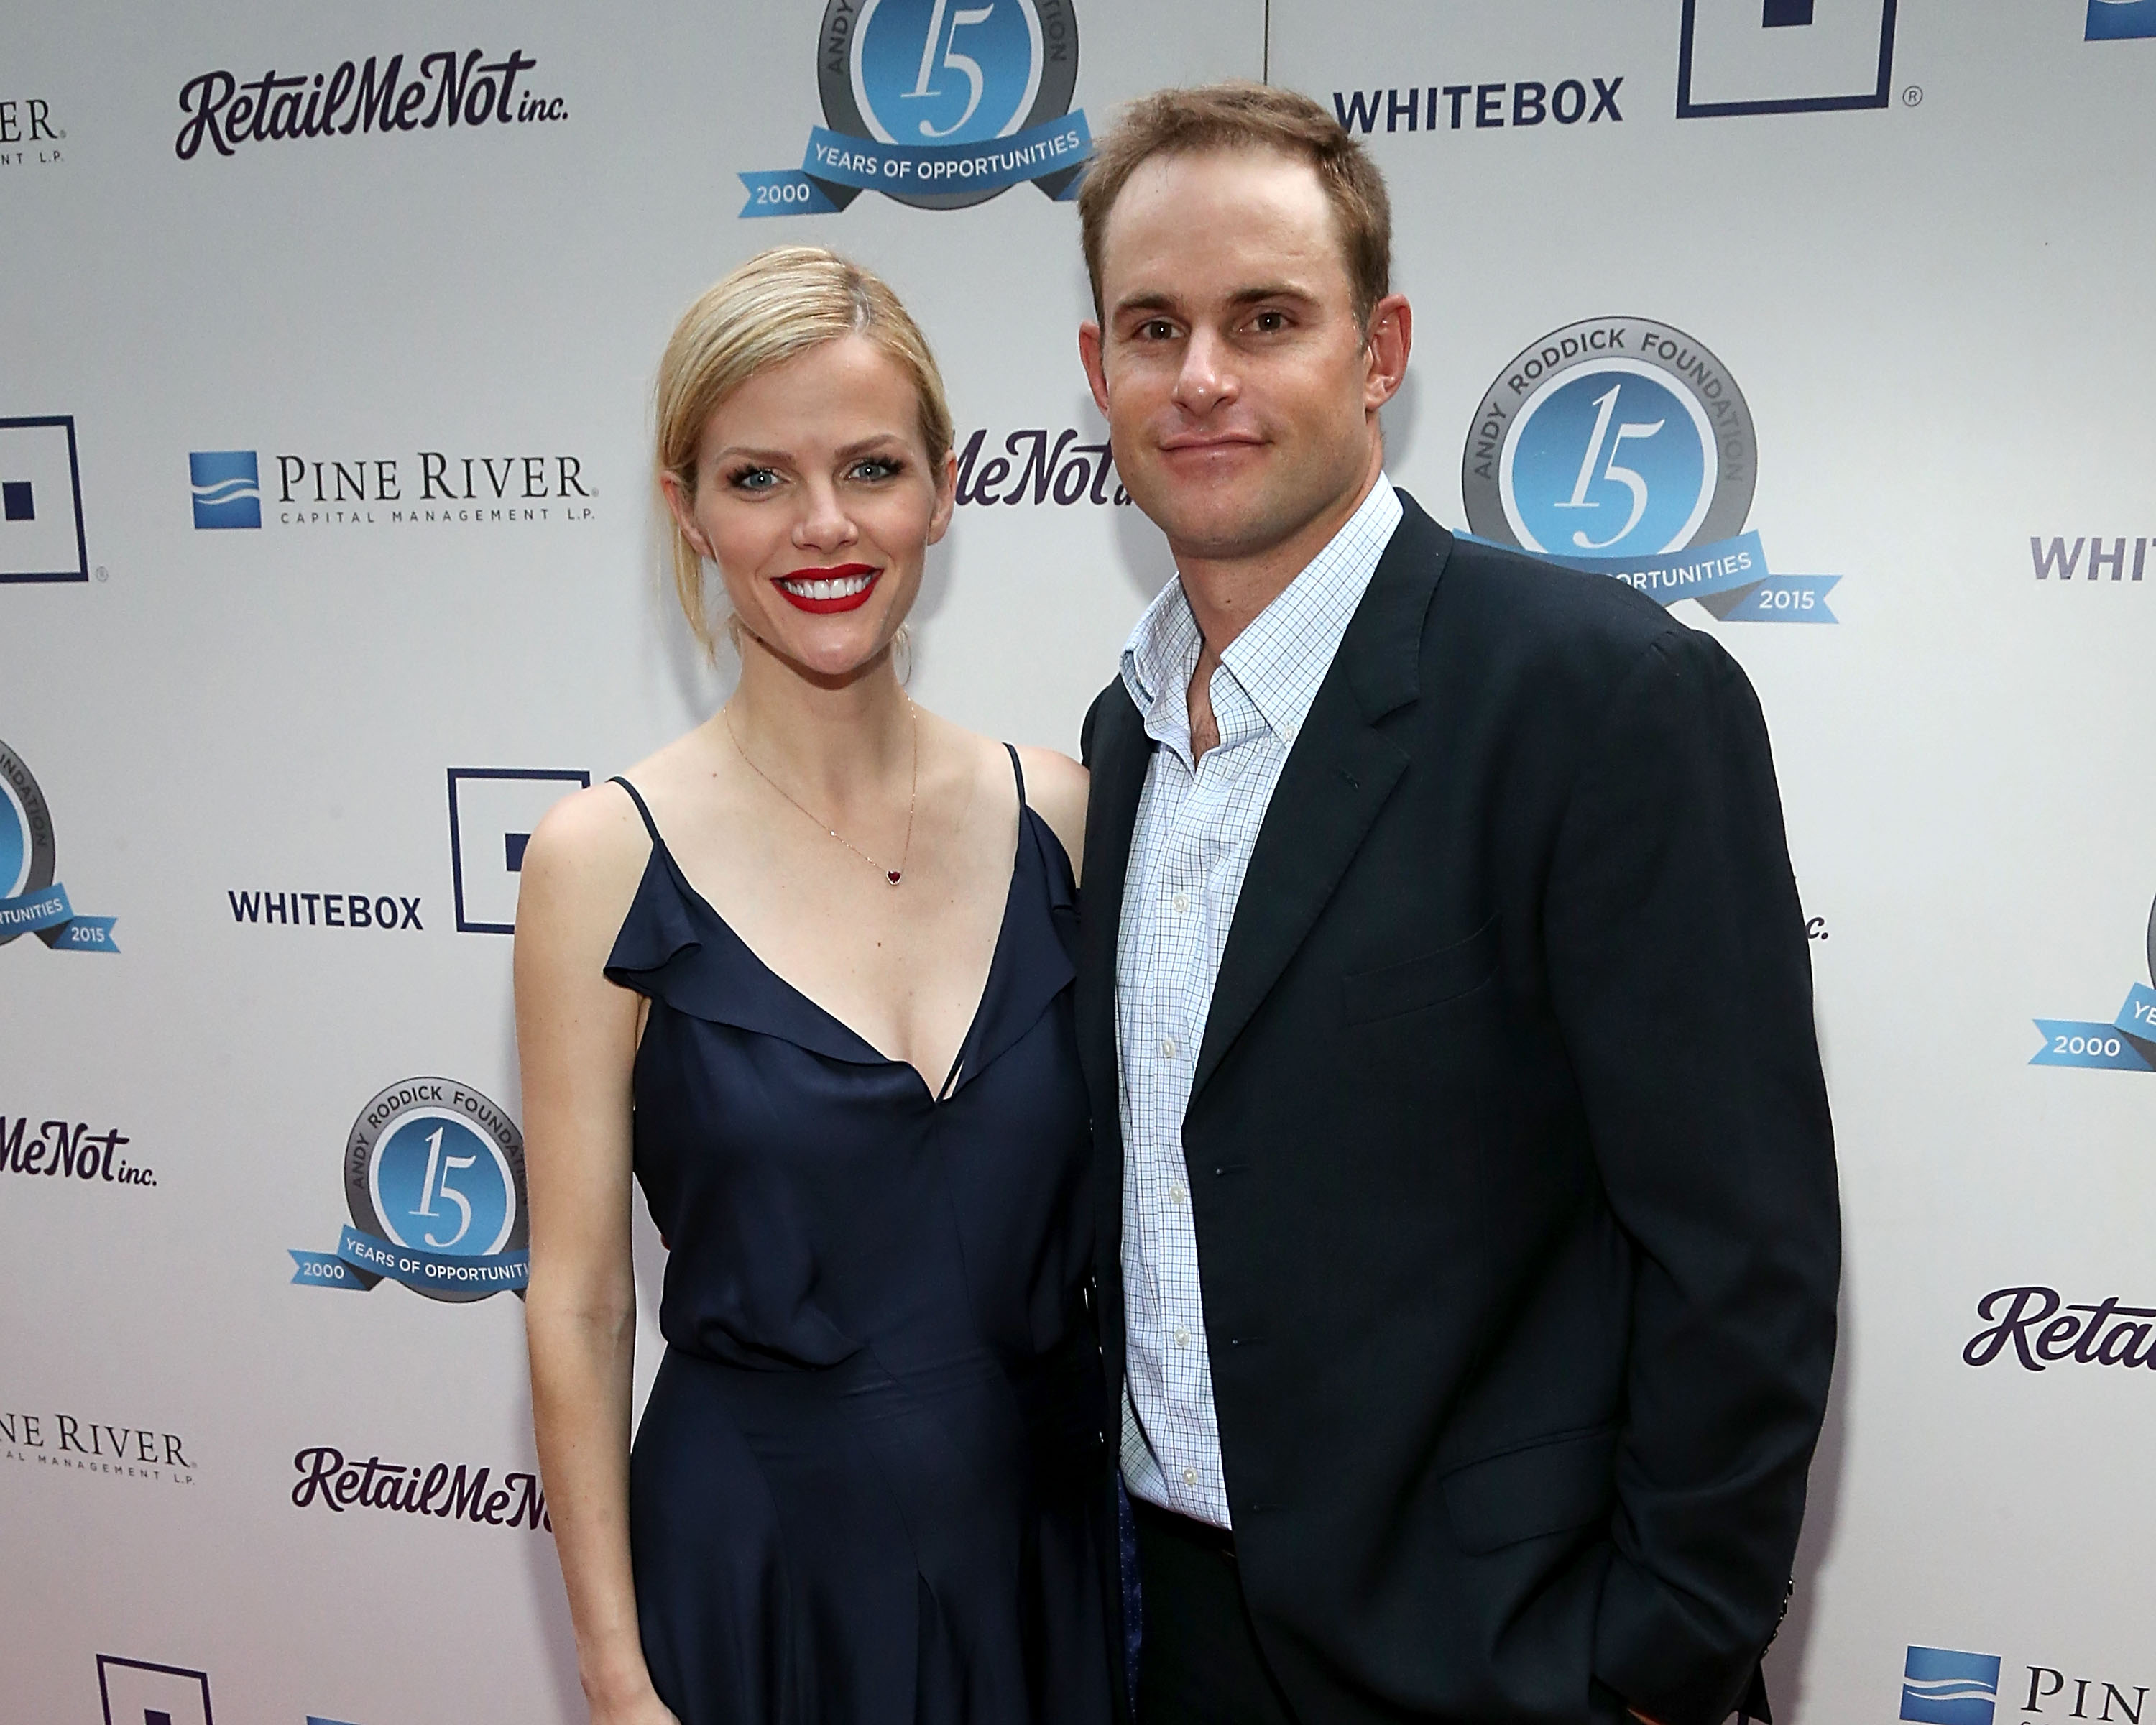 Brooklyn Decker Gives Birth—Welcomes Son With Husband Andy Roddick